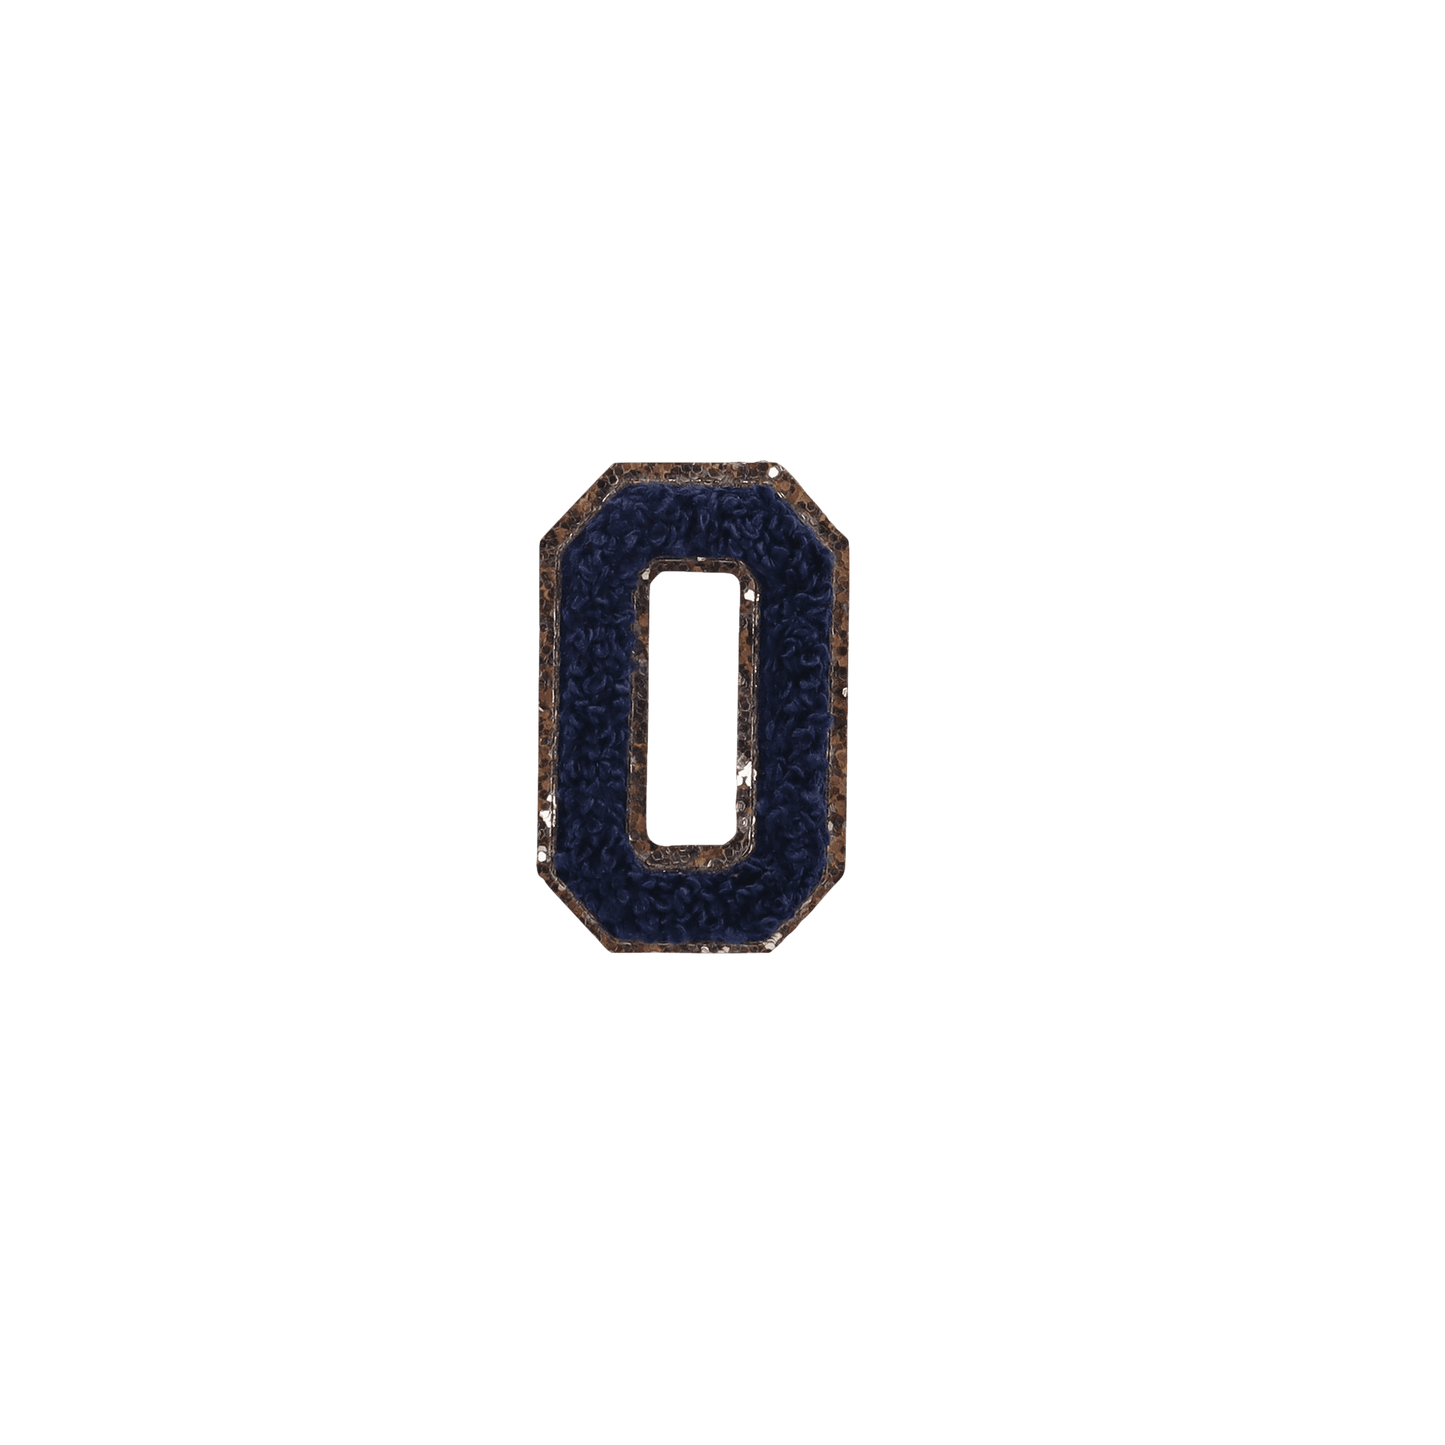 O Letter Patches